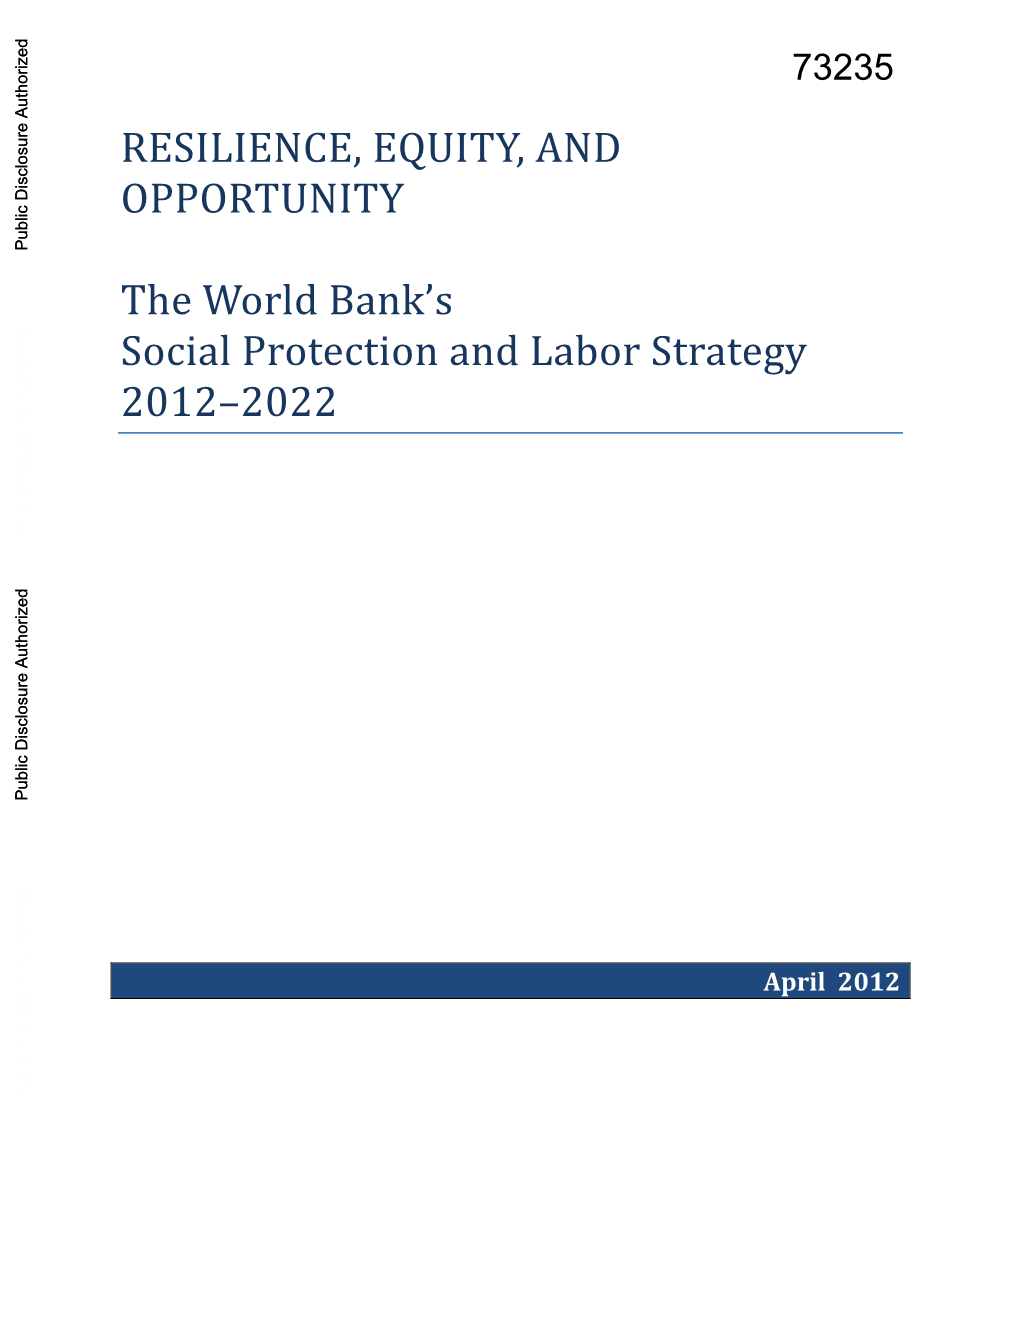 Social Protection and Labor Strategy 2012–2022